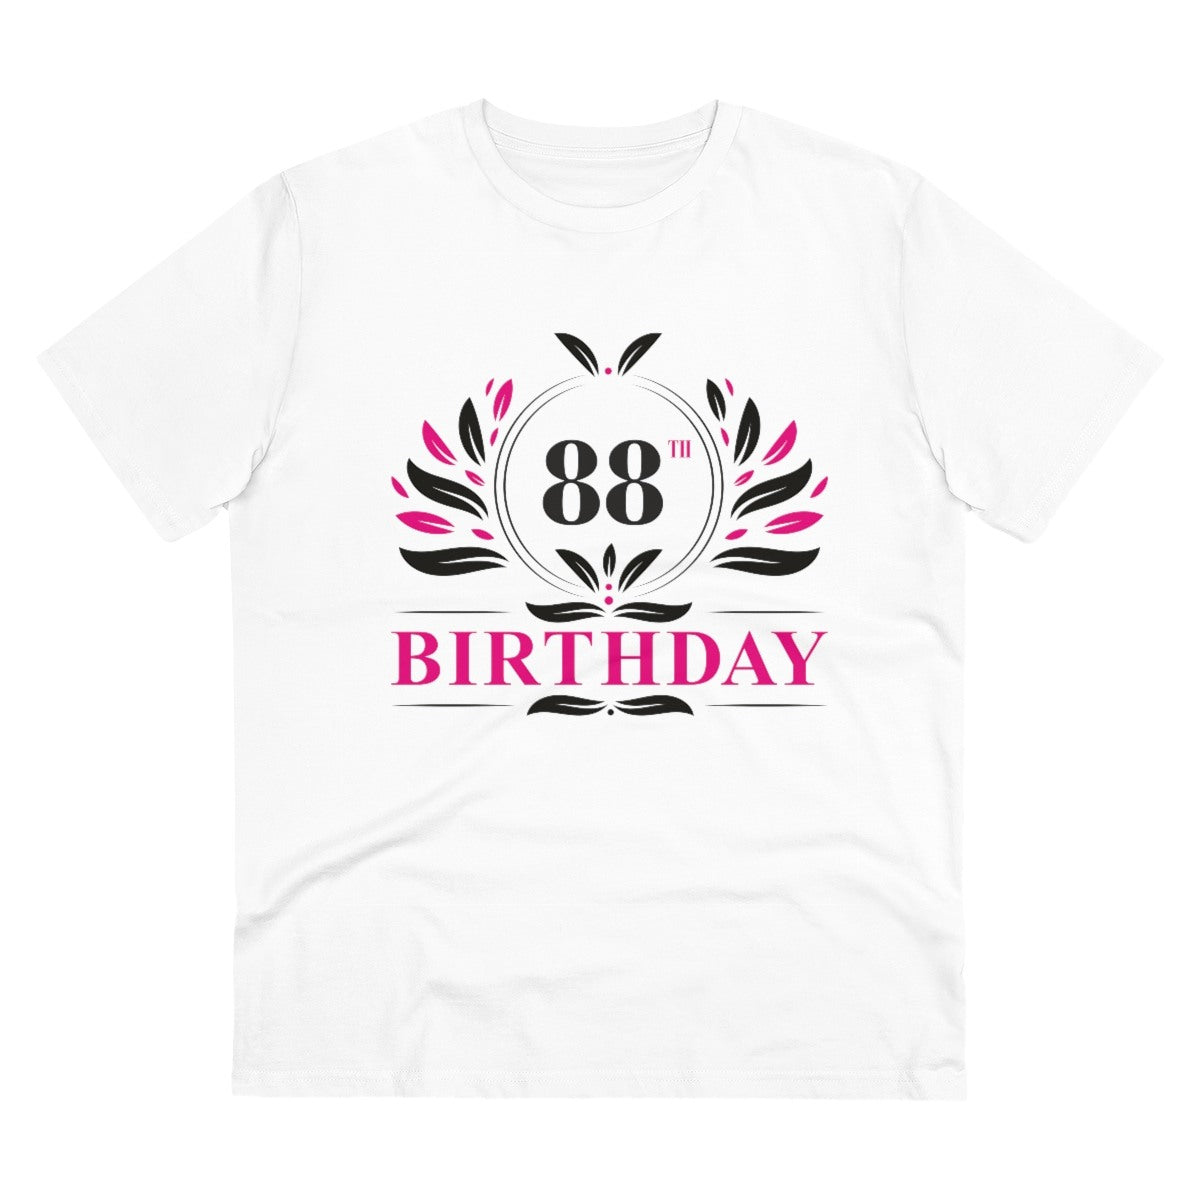 Men's PC Cotton 88th Birthday Printed T Shirt (Color: White, Thread Count: 180GSM) - GillKart